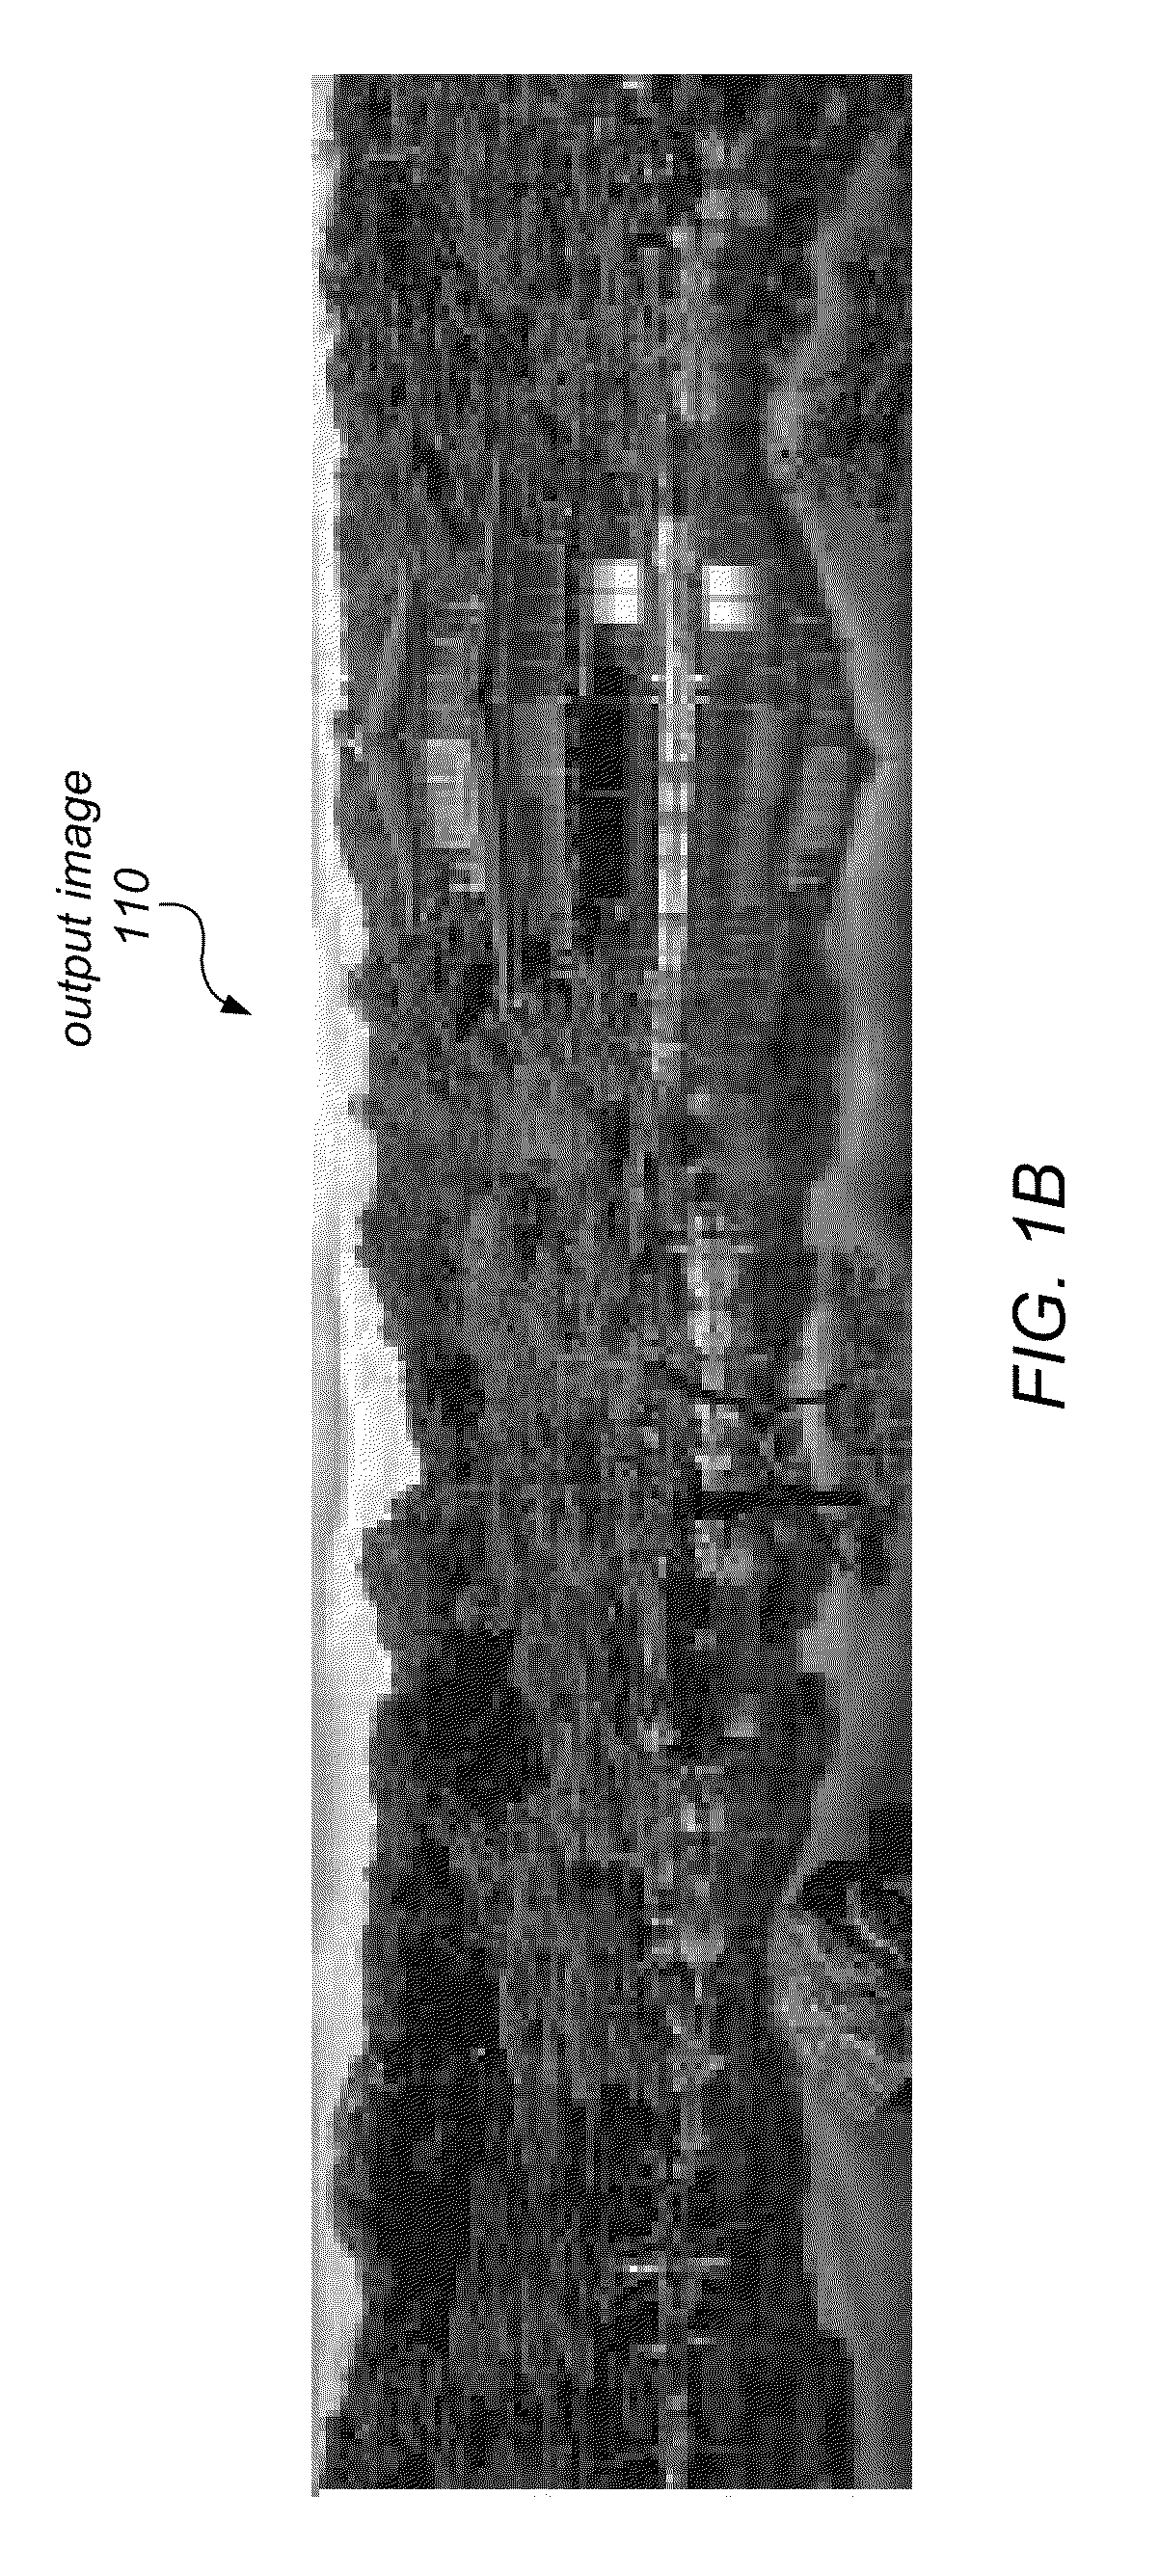 System and method for content aware hybrid cropping and seam carving of images